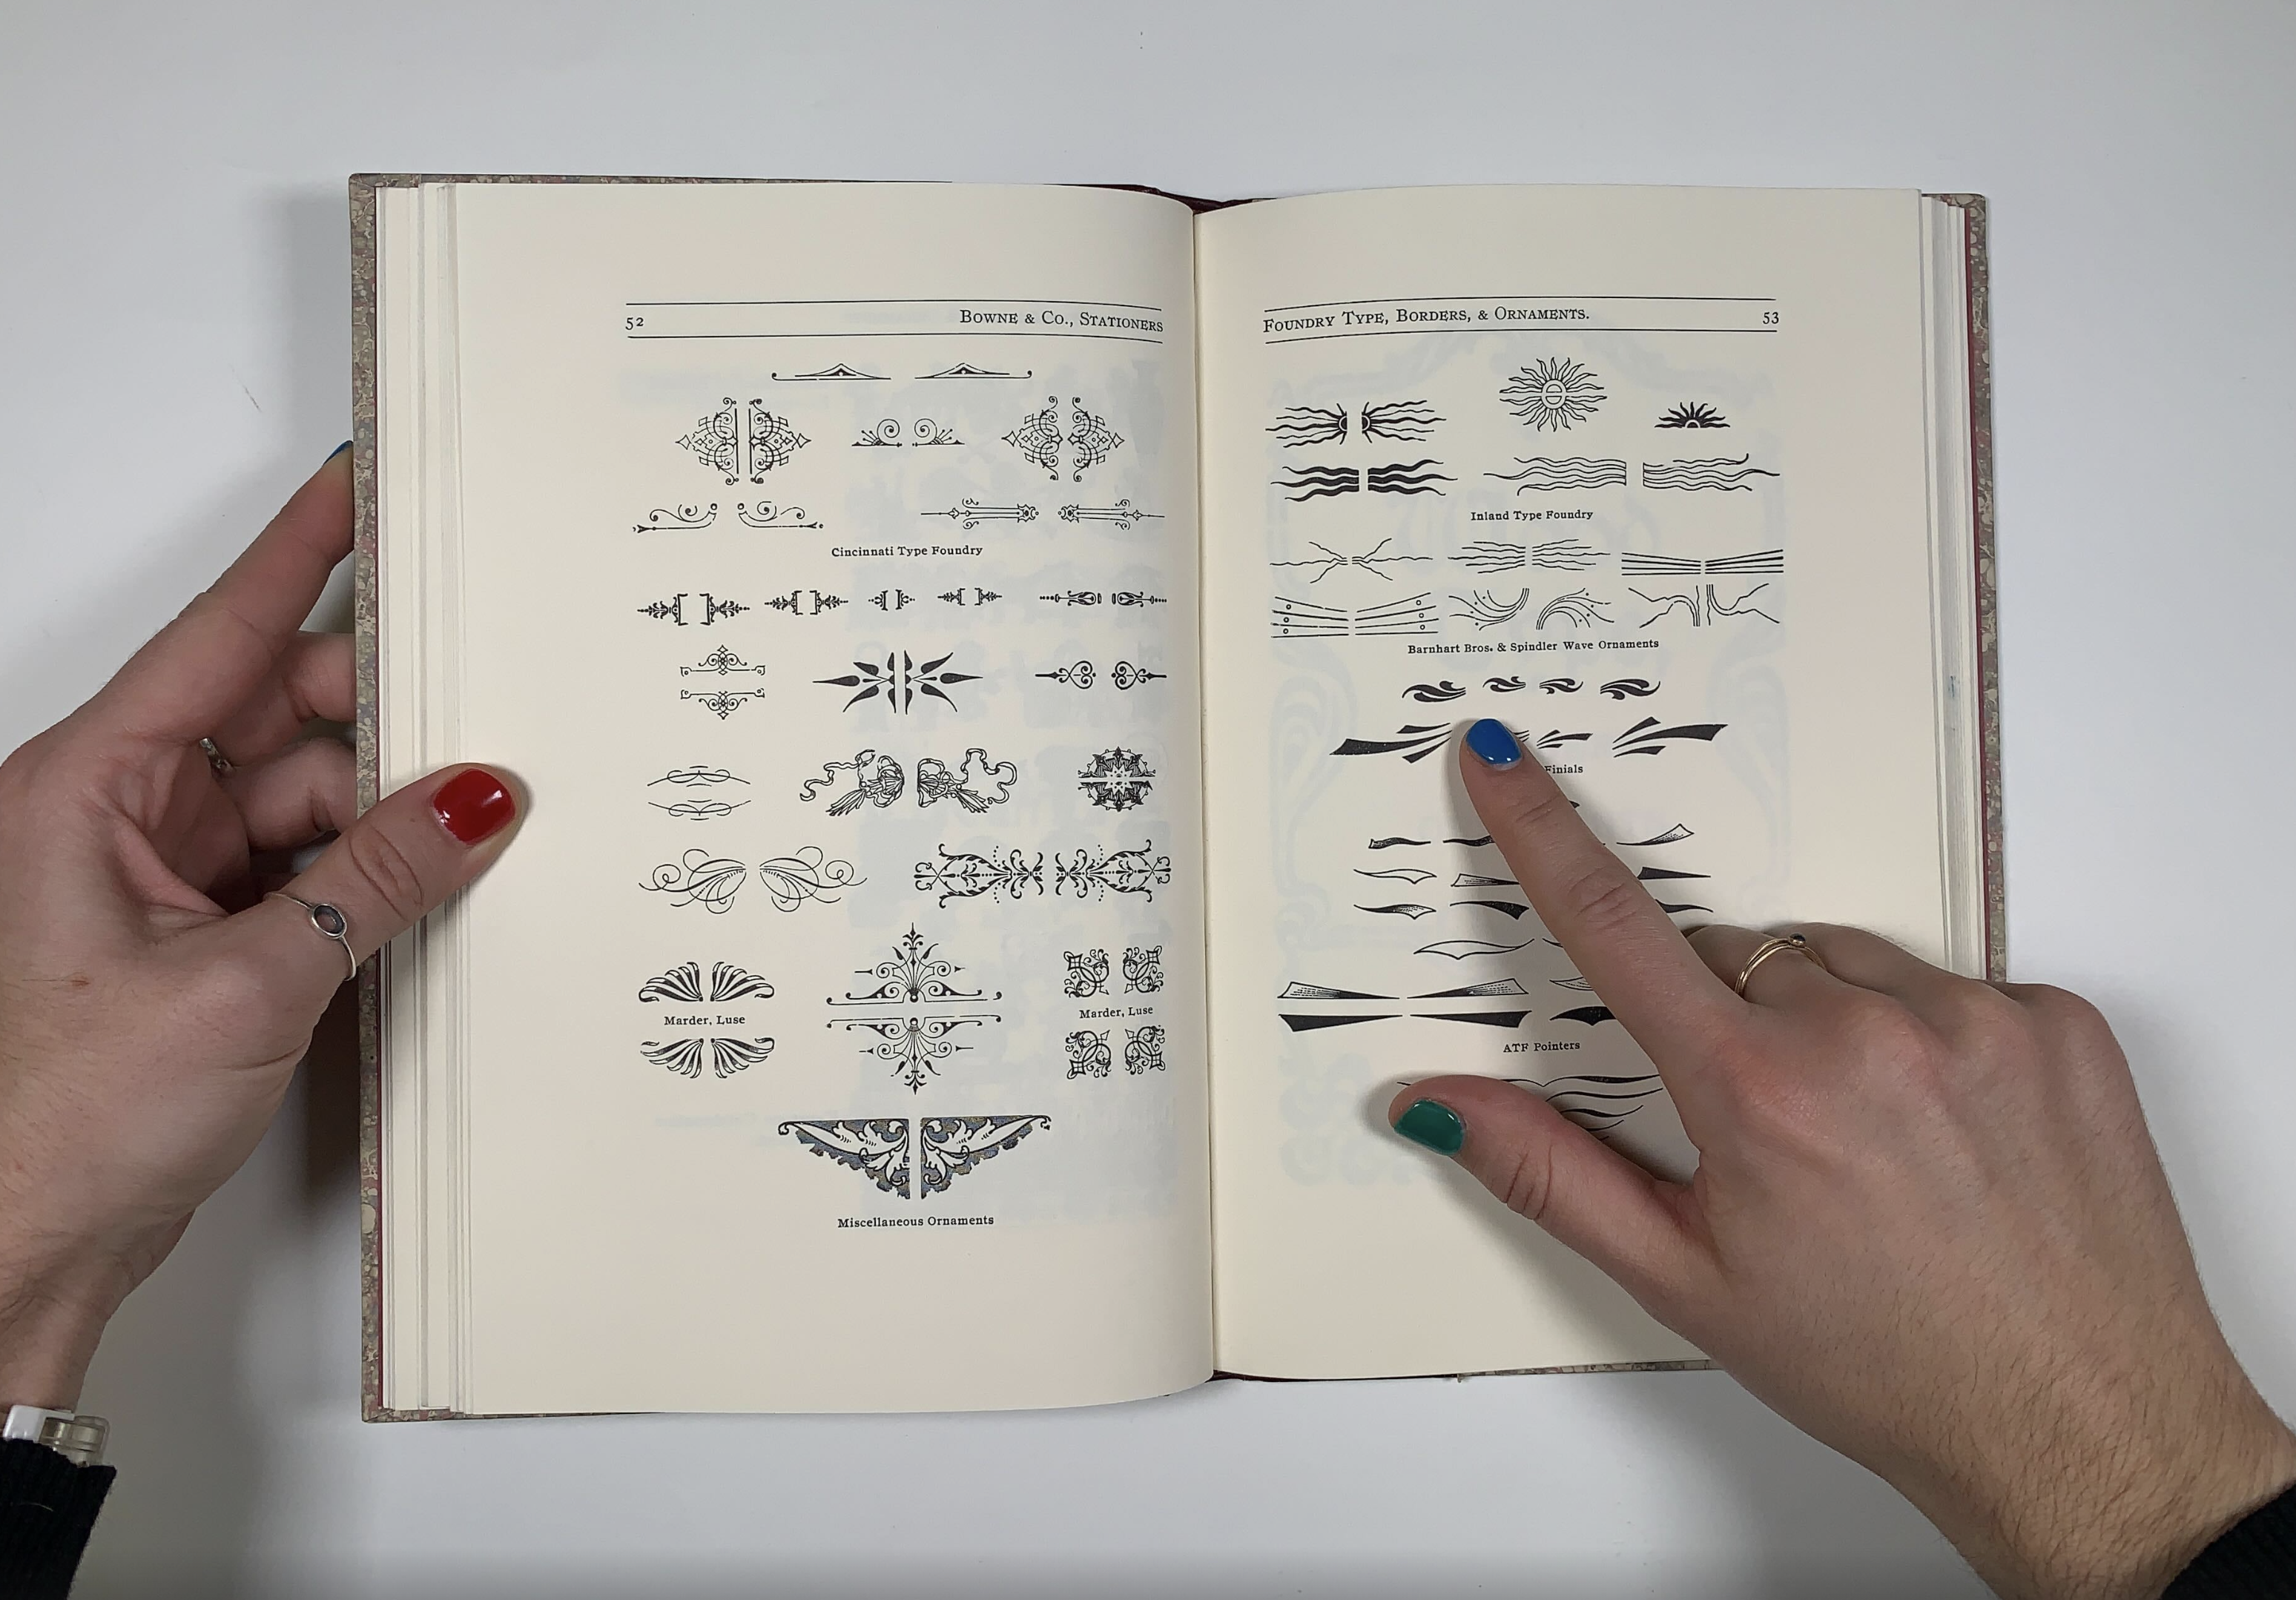 Two hands hold a type specimen book before a plain white background. The left hand holds the book open and the right hand points to a symbol on the page.